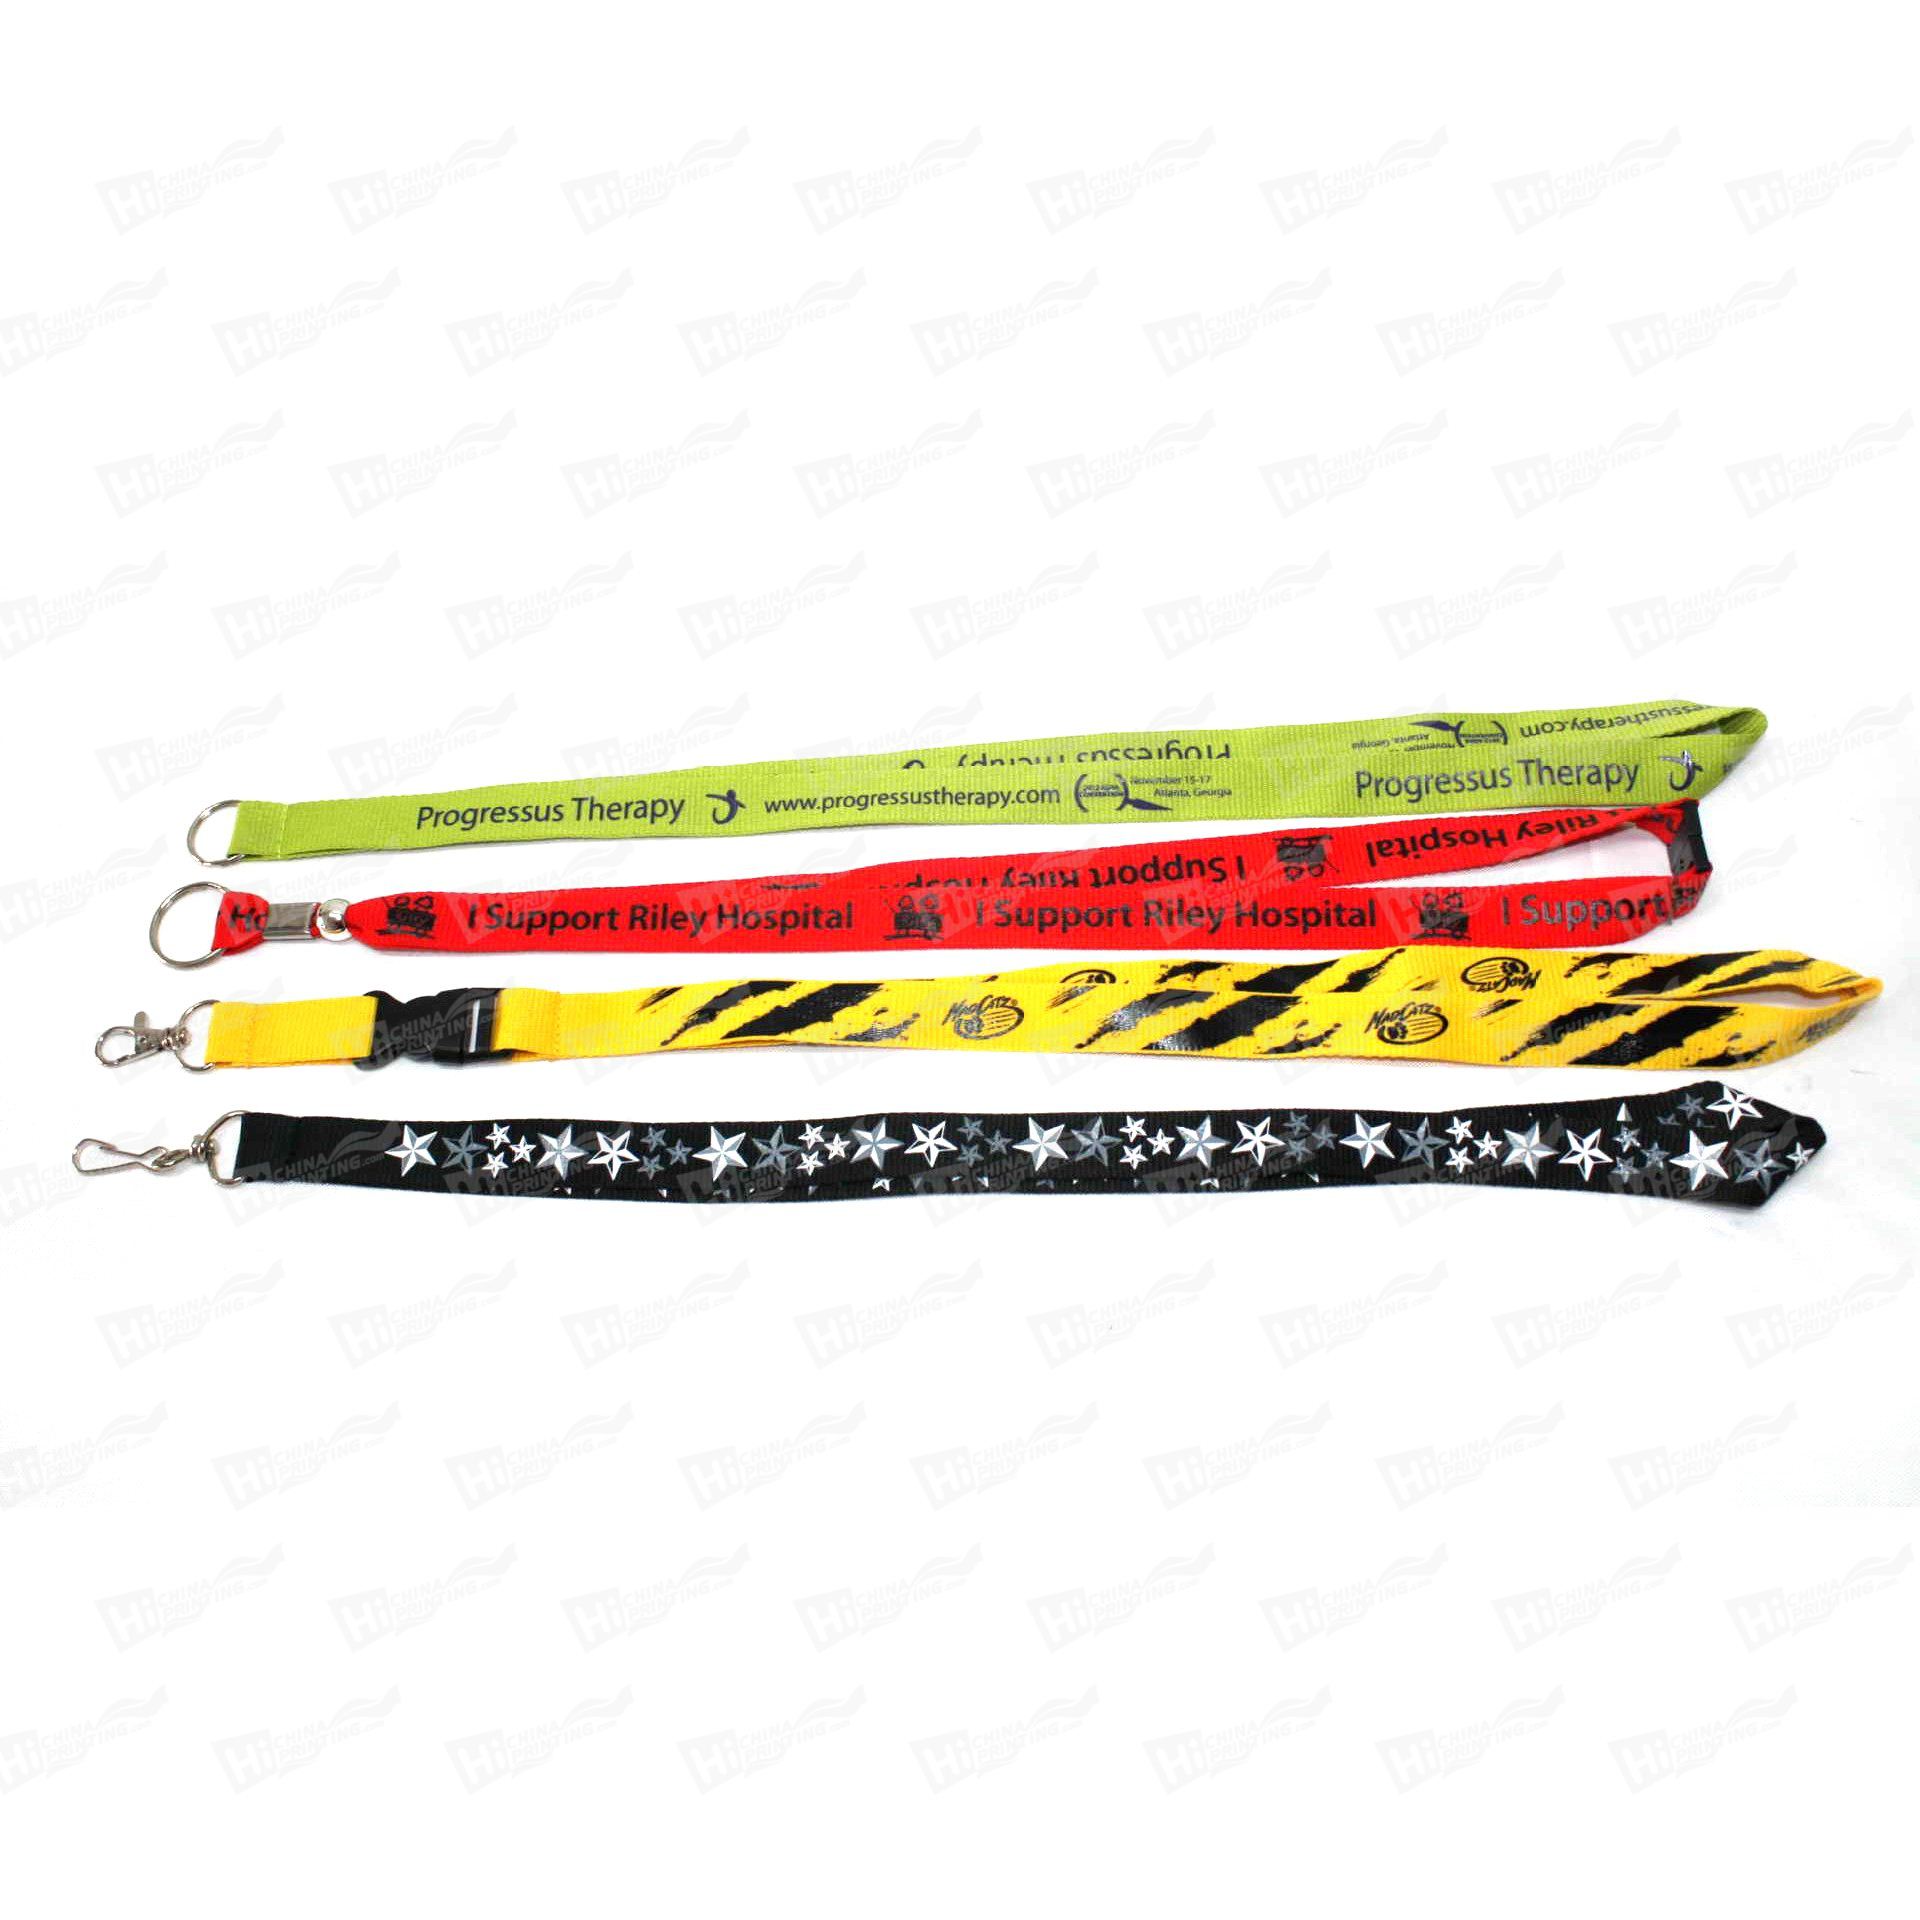 Printed Lanyards For Trade Show